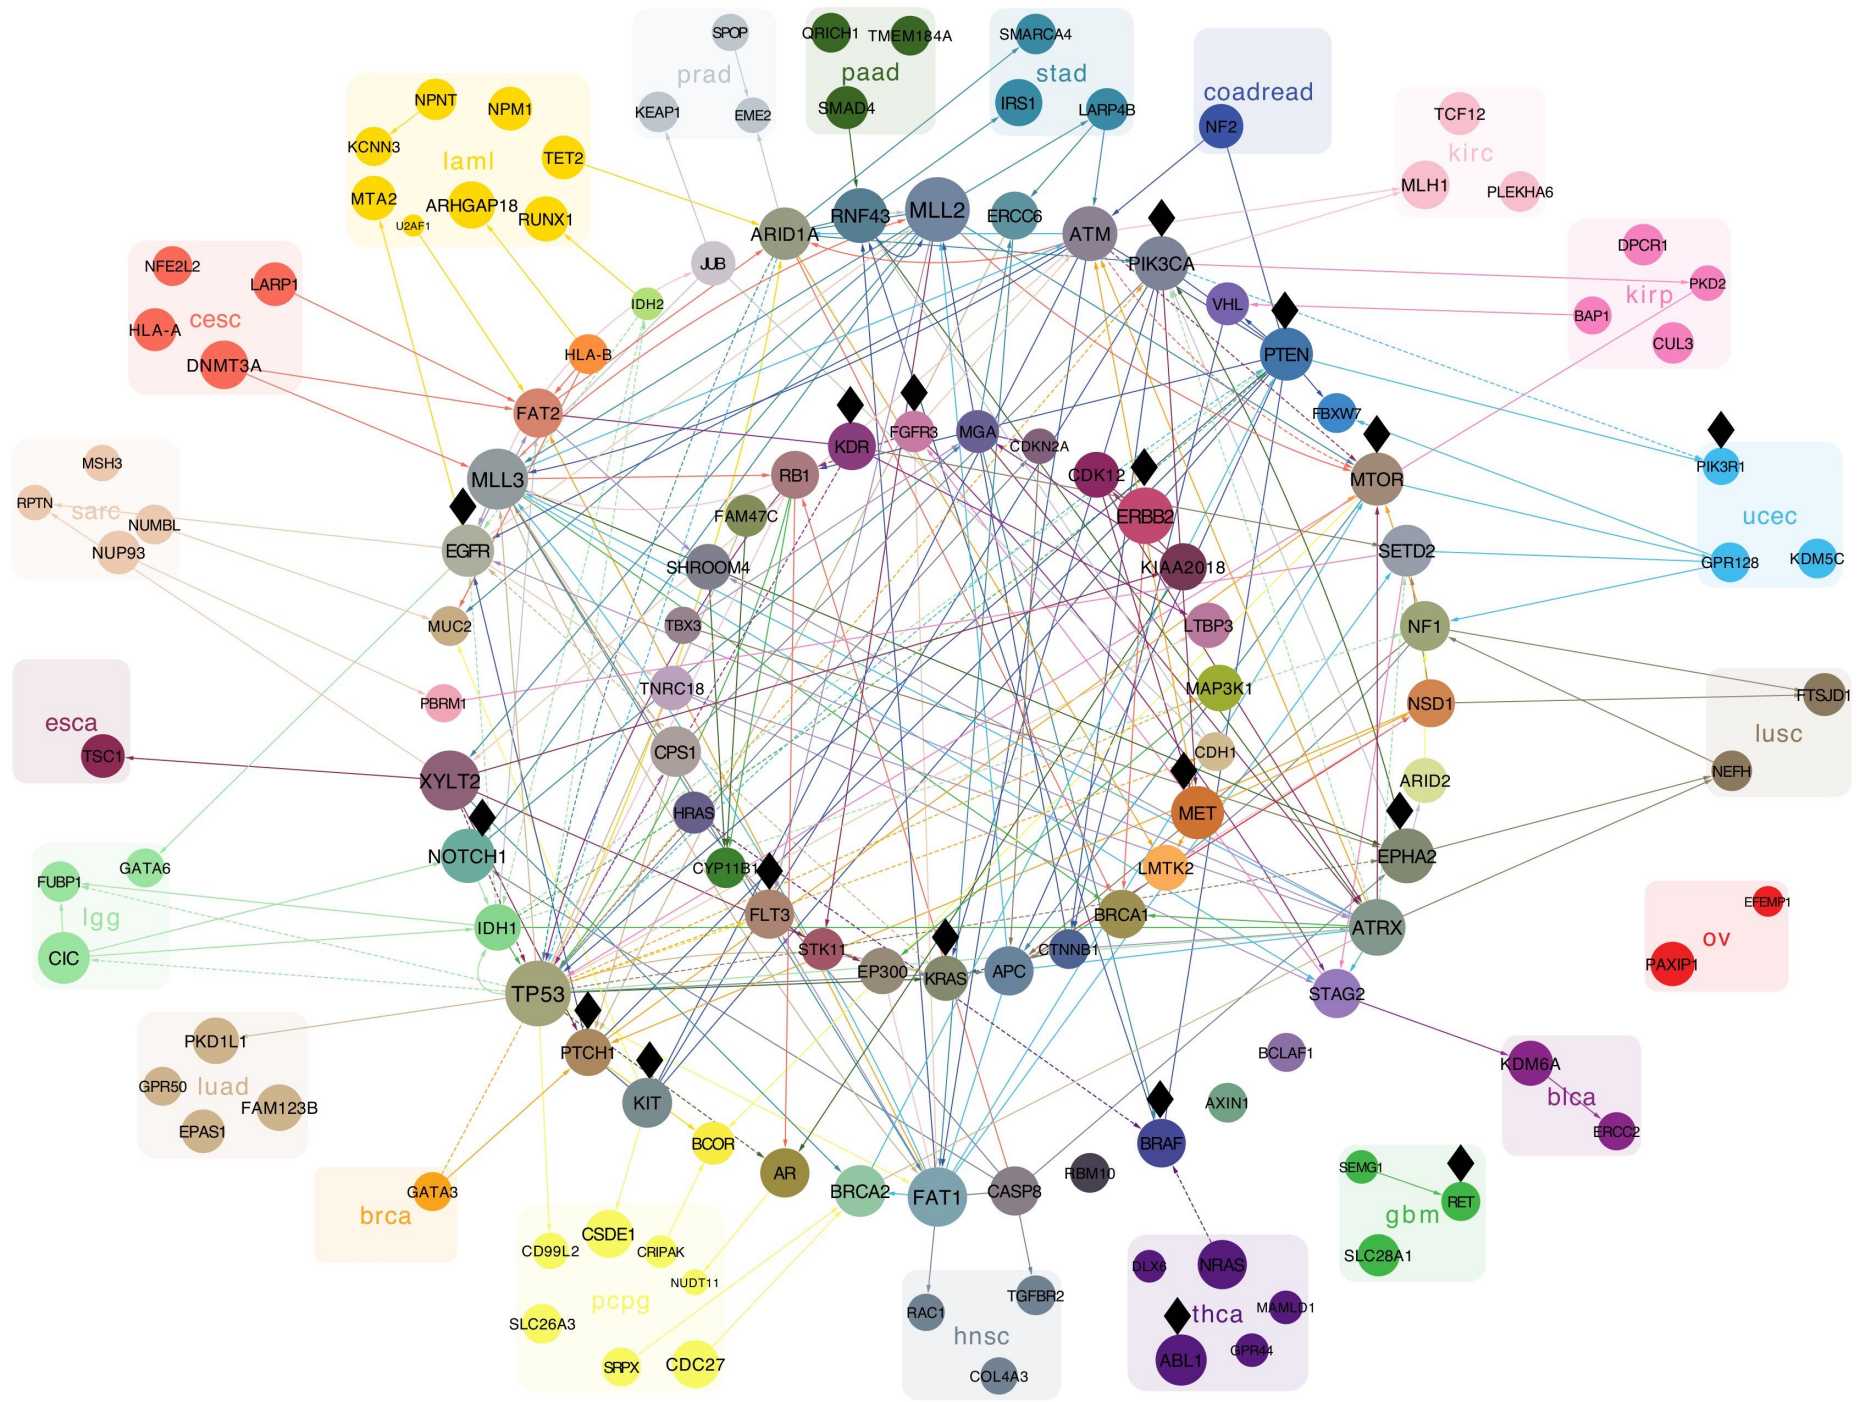 Enlarged view: Visualisation of mutational interactions that define novel cancer subgroups